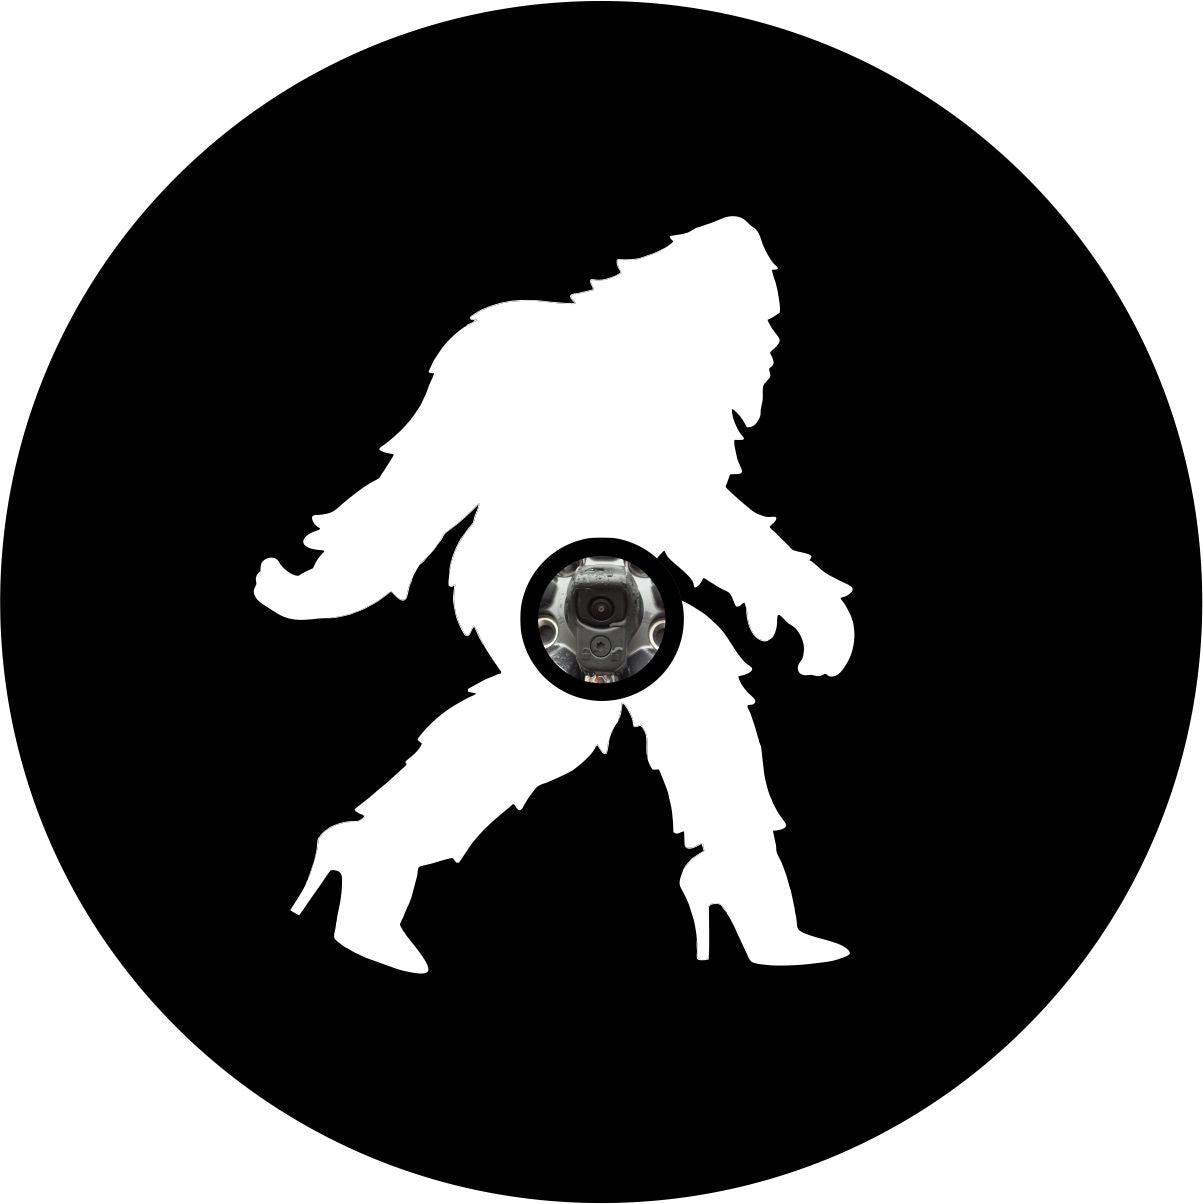 Black Vinyl Spare Tire Cover With A Silhouette Of A Bigfoot Shesquatch in high heels Walking Across The Center plus a camera hole space for a back up camera